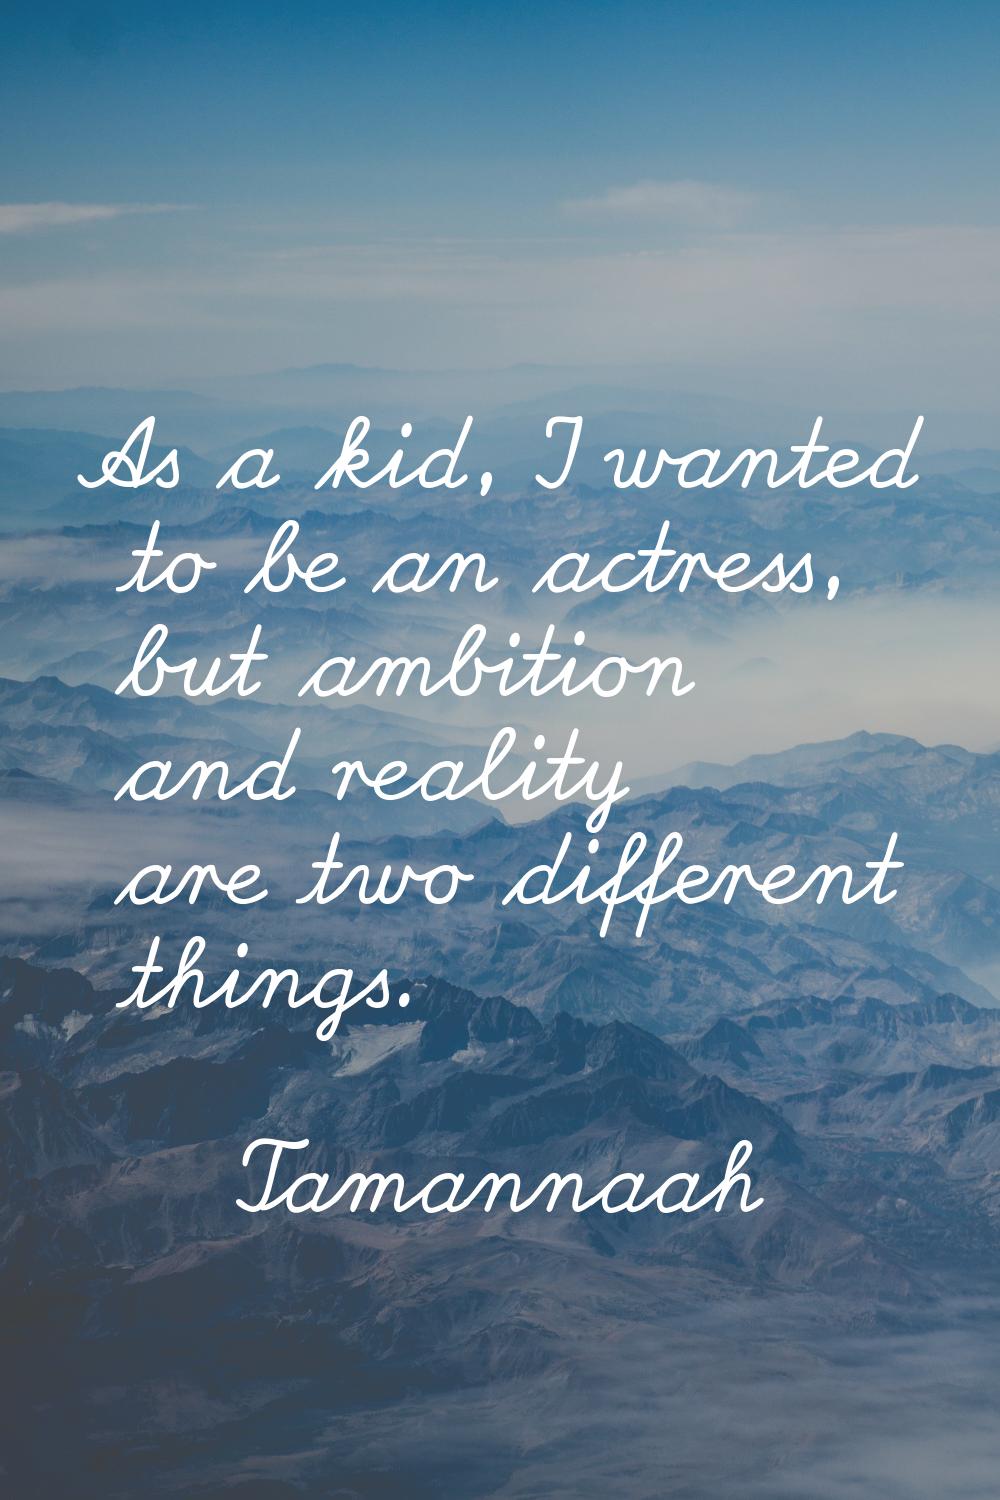 As a kid, I wanted to be an actress, but ambition and reality are two different things.